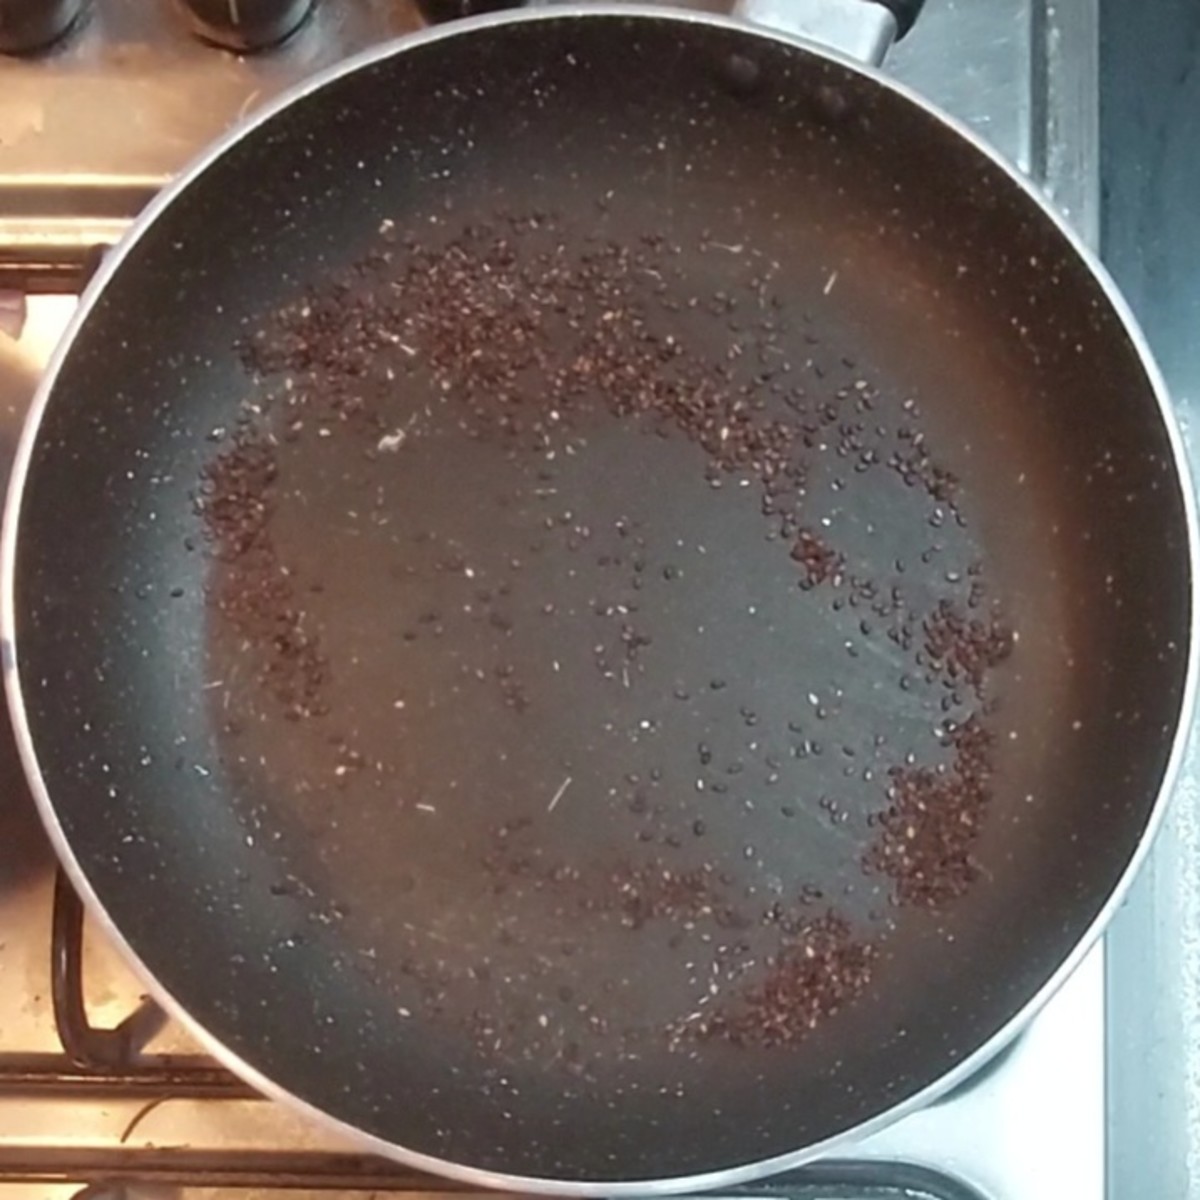 In a frying pan, add 1 tablespoon sesame seeds. Dry-fry till aromatic. Transfer to a plate.